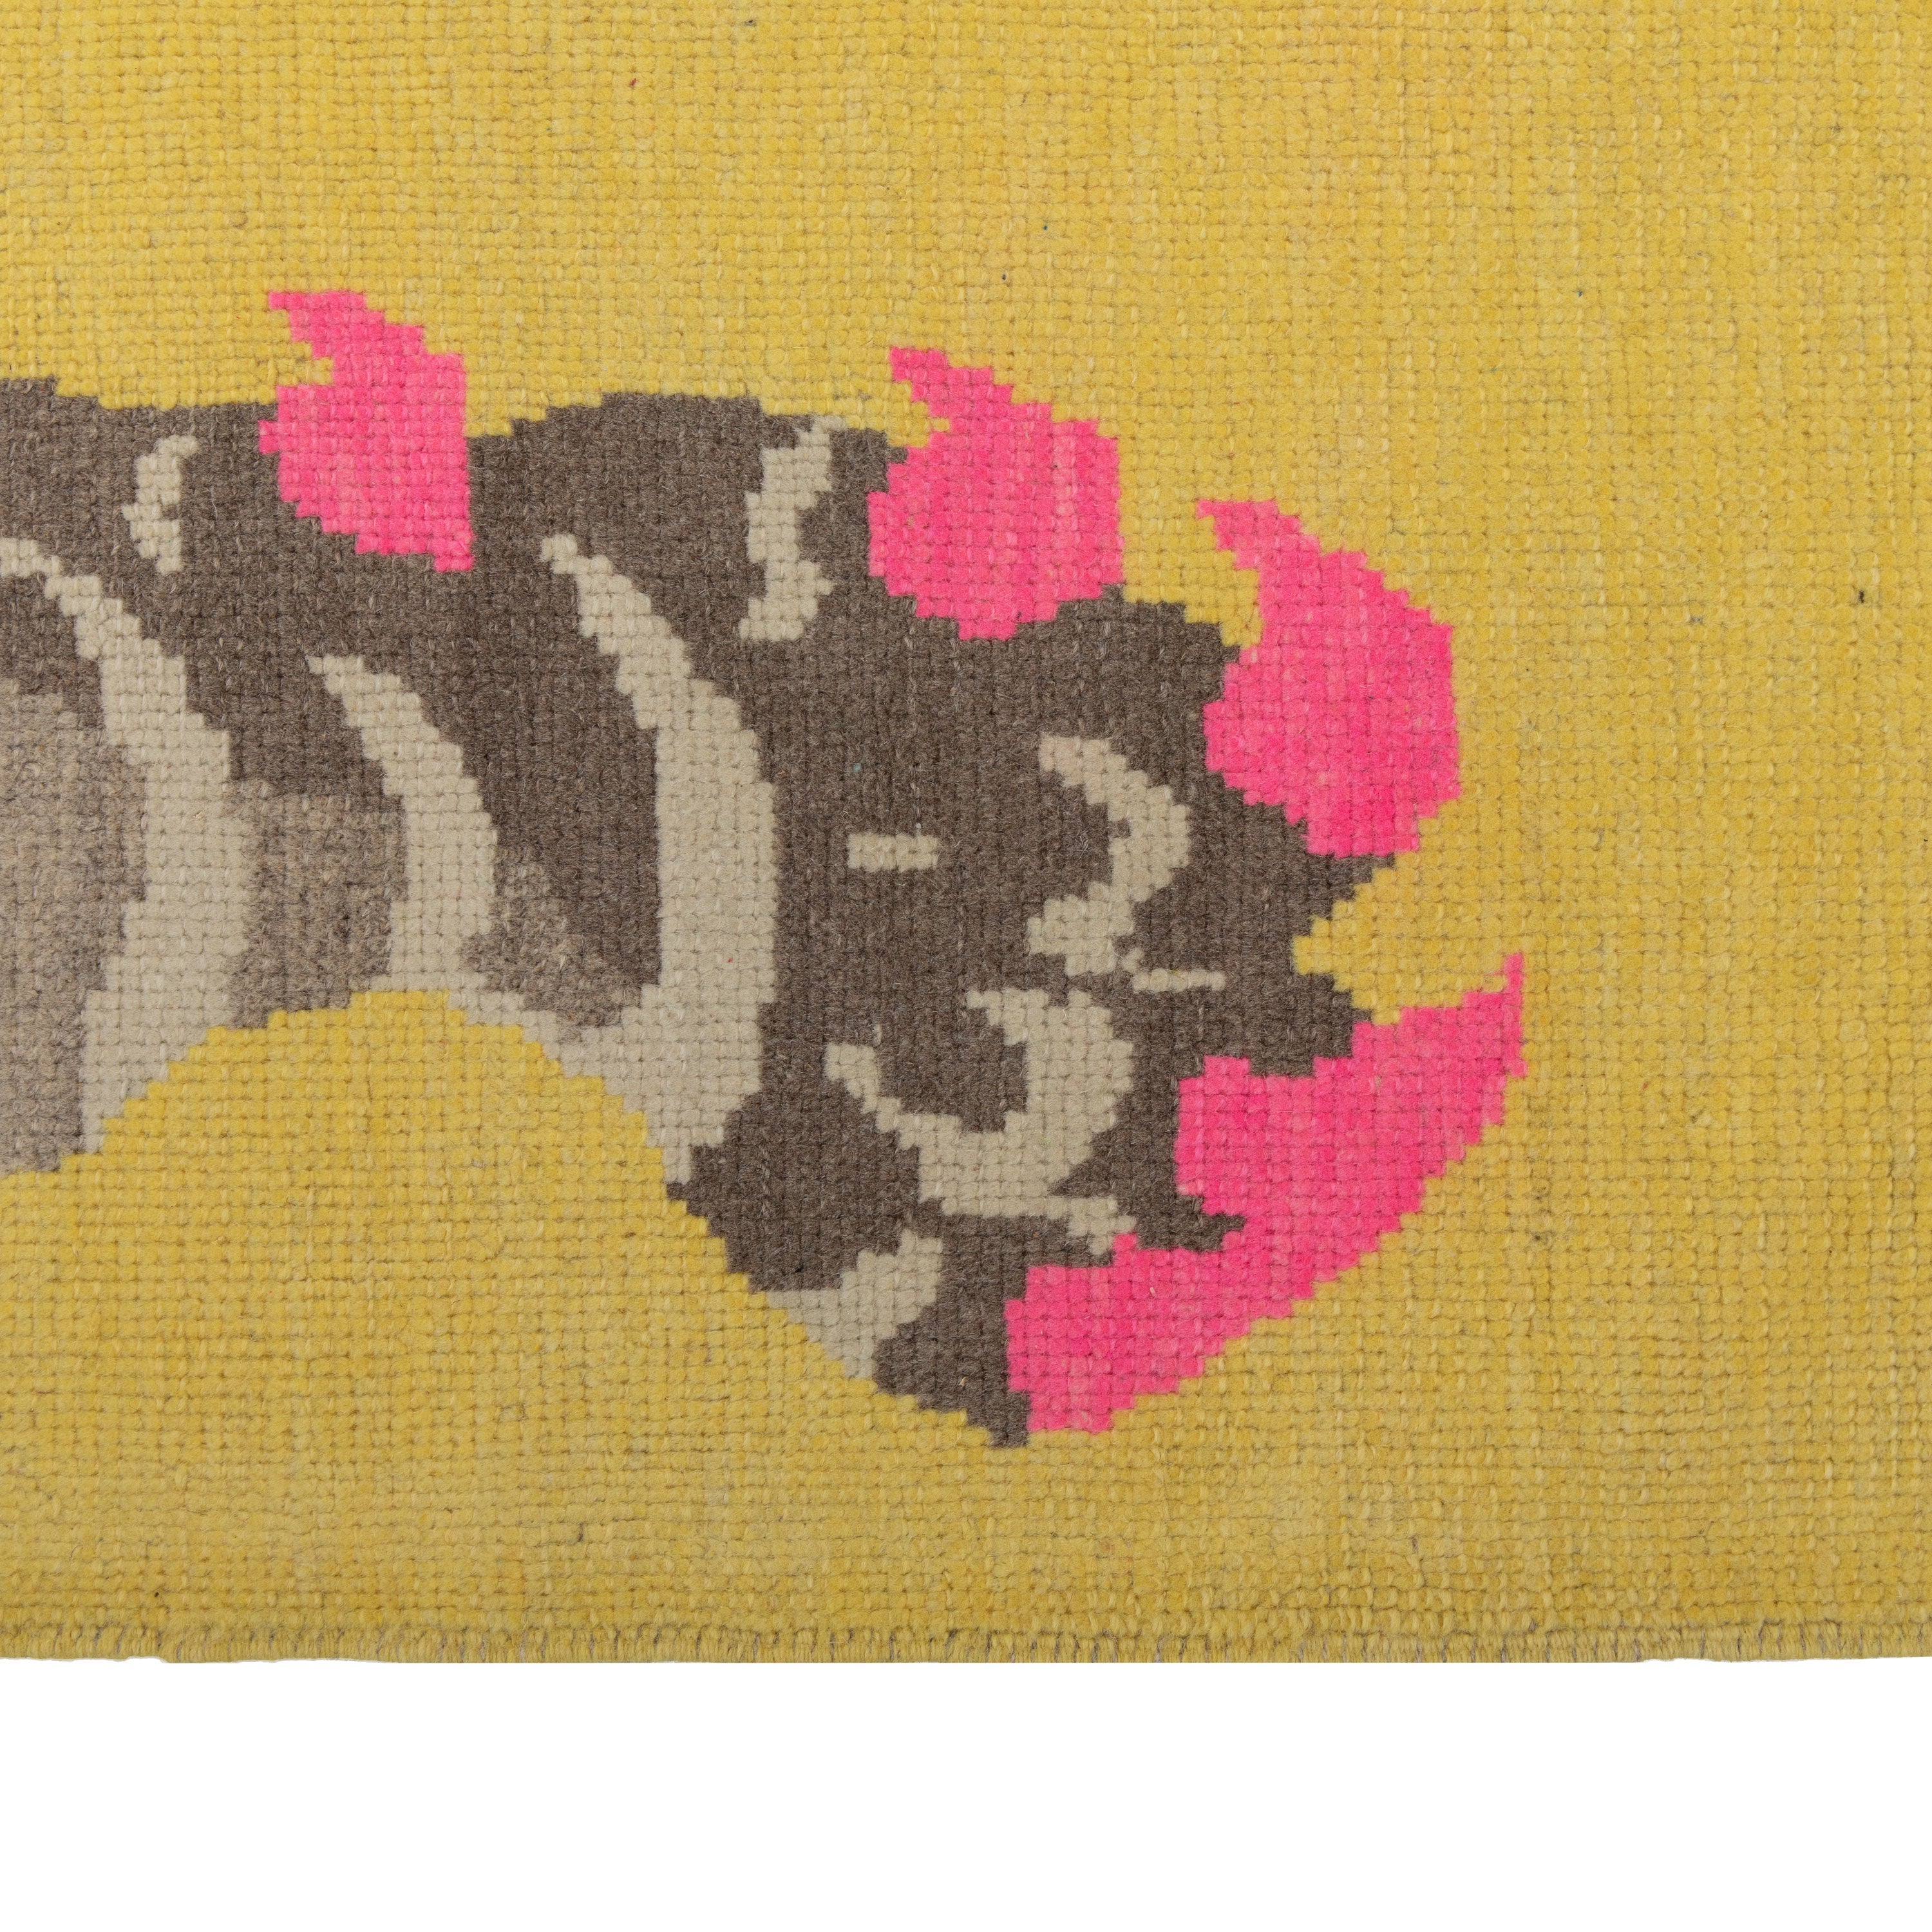 Yellow Contemporary Tiger Wool Rug - 6'8" x 10'6"